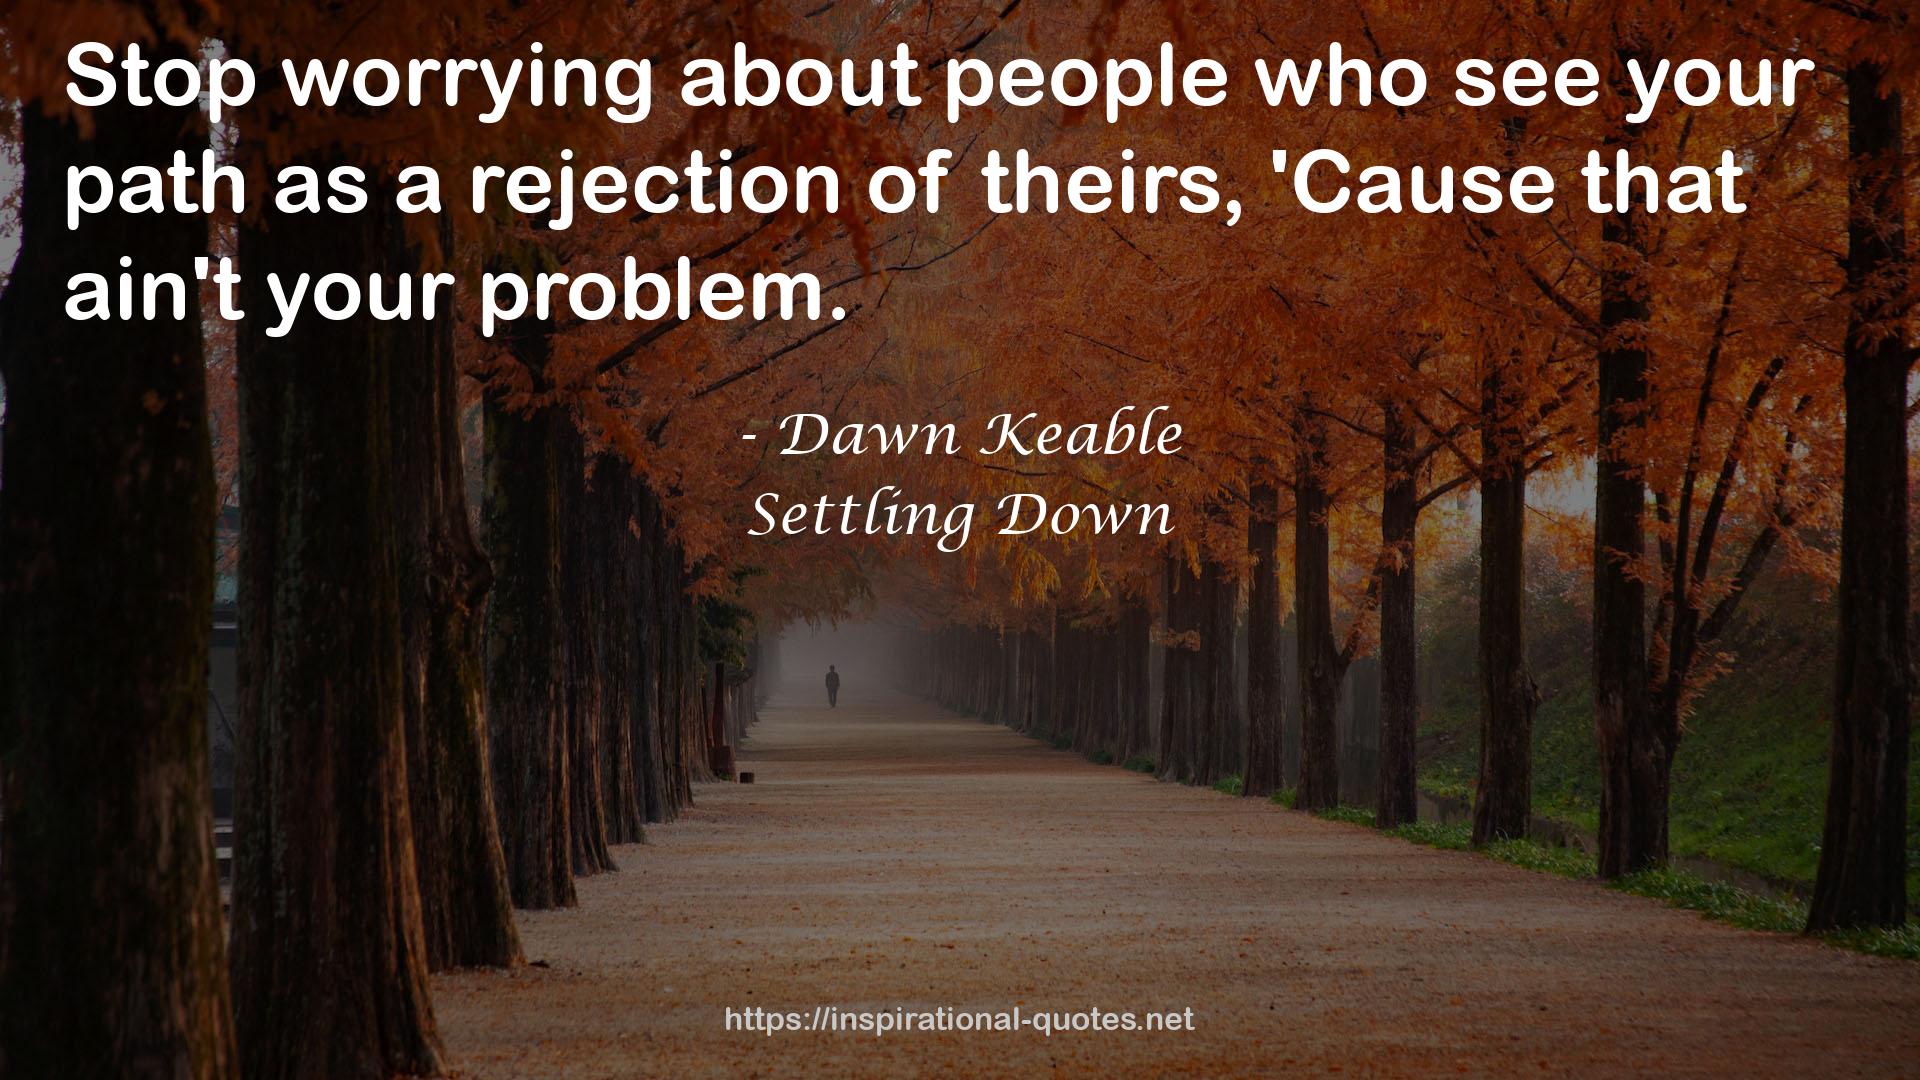 Dawn Keable QUOTES